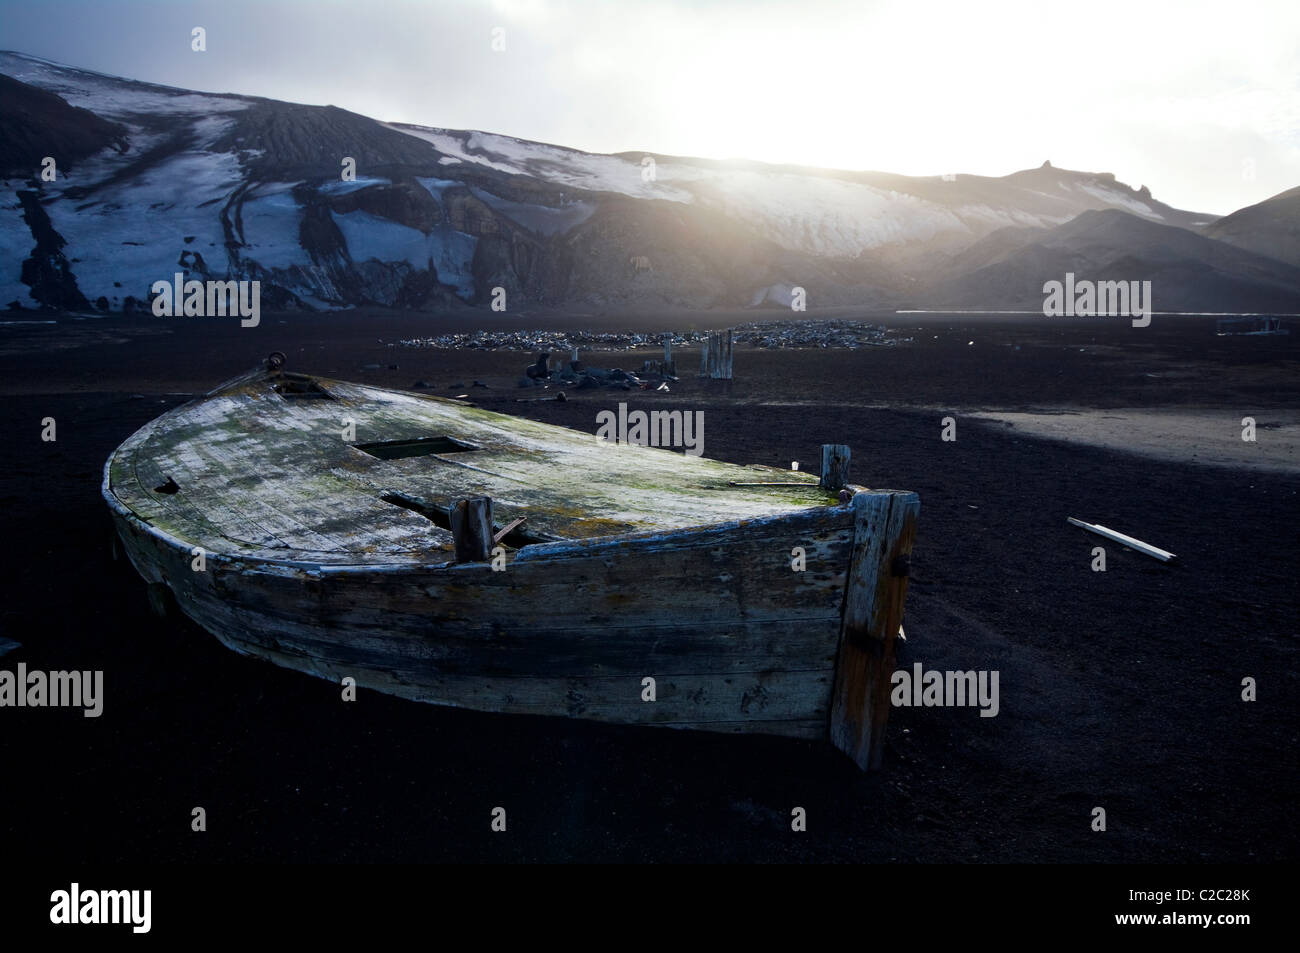 Antique timber whaling boat ruins stranded in black volcanic sand. Stock Photo